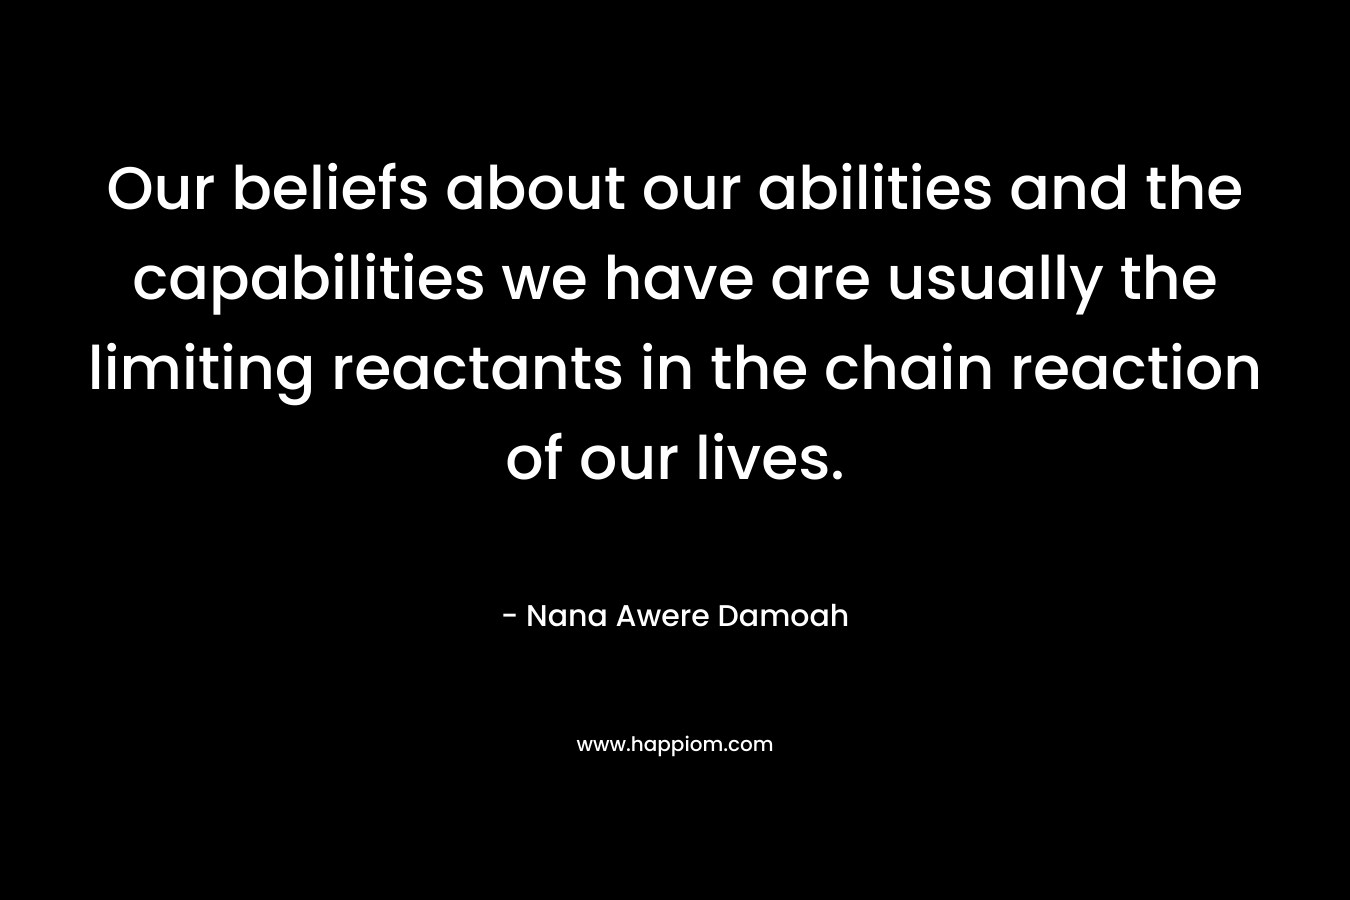 Our beliefs about our abilities and the capabilities we have are usually the limiting reactants in the chain reaction of our lives.